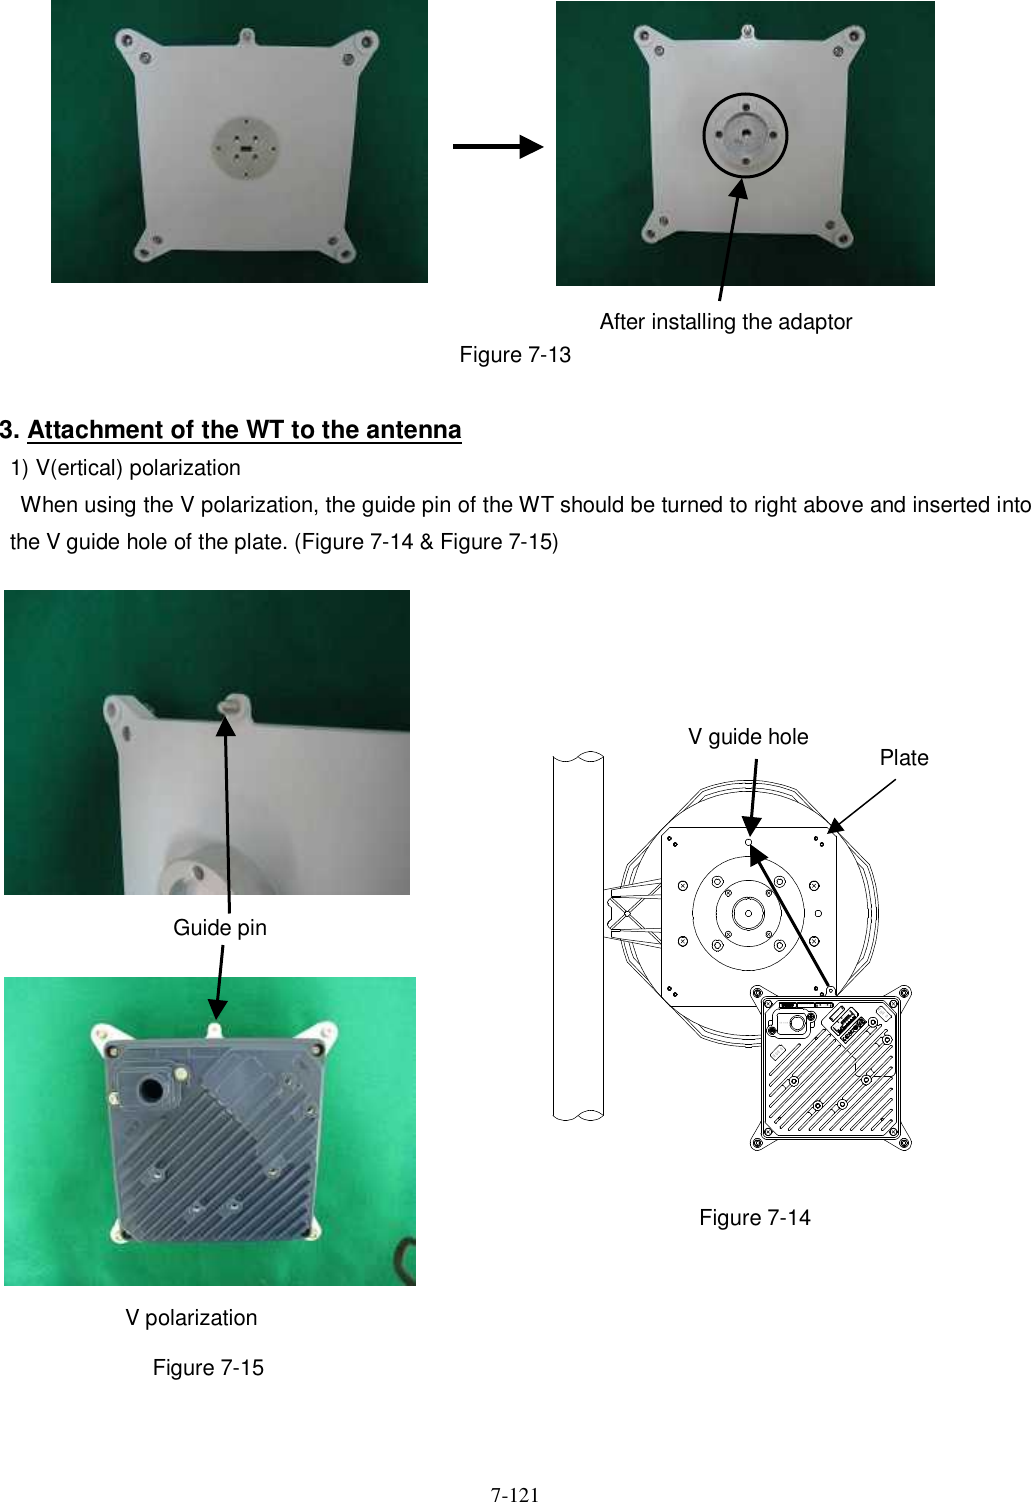   7-121            Figure 7-13  3. Attachment of the WT to the antenna 1) V(ertical) polarization     When using the V polarization, the guide pin of the WT should be turned to right above and inserted into the V guide hole of the plate. (Figure 7-14 &amp; Figure 7-15)                                  Figure 7-14           Figure 7-15   V polarization Guide pin Ｉ Ｃ： ７６ ８ Ｂ−Ｎ Ｔ Ｇ３ ３７ 注 ５ＴＯＰＶＴ ＯＰ ＨＥＴ Ｈ ＥＲＩＮ Ｐ ＵＴ：Ｓ Ｅ Ｒ ． ＮＯ：Ｍ Ａ Ｃ ：．： ： ： ： ：ＭＡ Ｄ ＥＩ Ｎ ＪＡＰ Ａ ＮＤＣ２４Ｖ０．７ＡＴＹＰＥＷ−ＷＴ ＜ 注 １＞Ｆ Ｃ ＣＩＤ：Ｃ ＫＥＮＴＧ３３ ７ − 注 １ＷＴ ＥＬ２ＭＯ Ｄ Ｅ Ｌ： Ｎ Ｔ Ｇ −３ ３ ７ 注２ ＲV guide hole Plate After installing the adaptor 